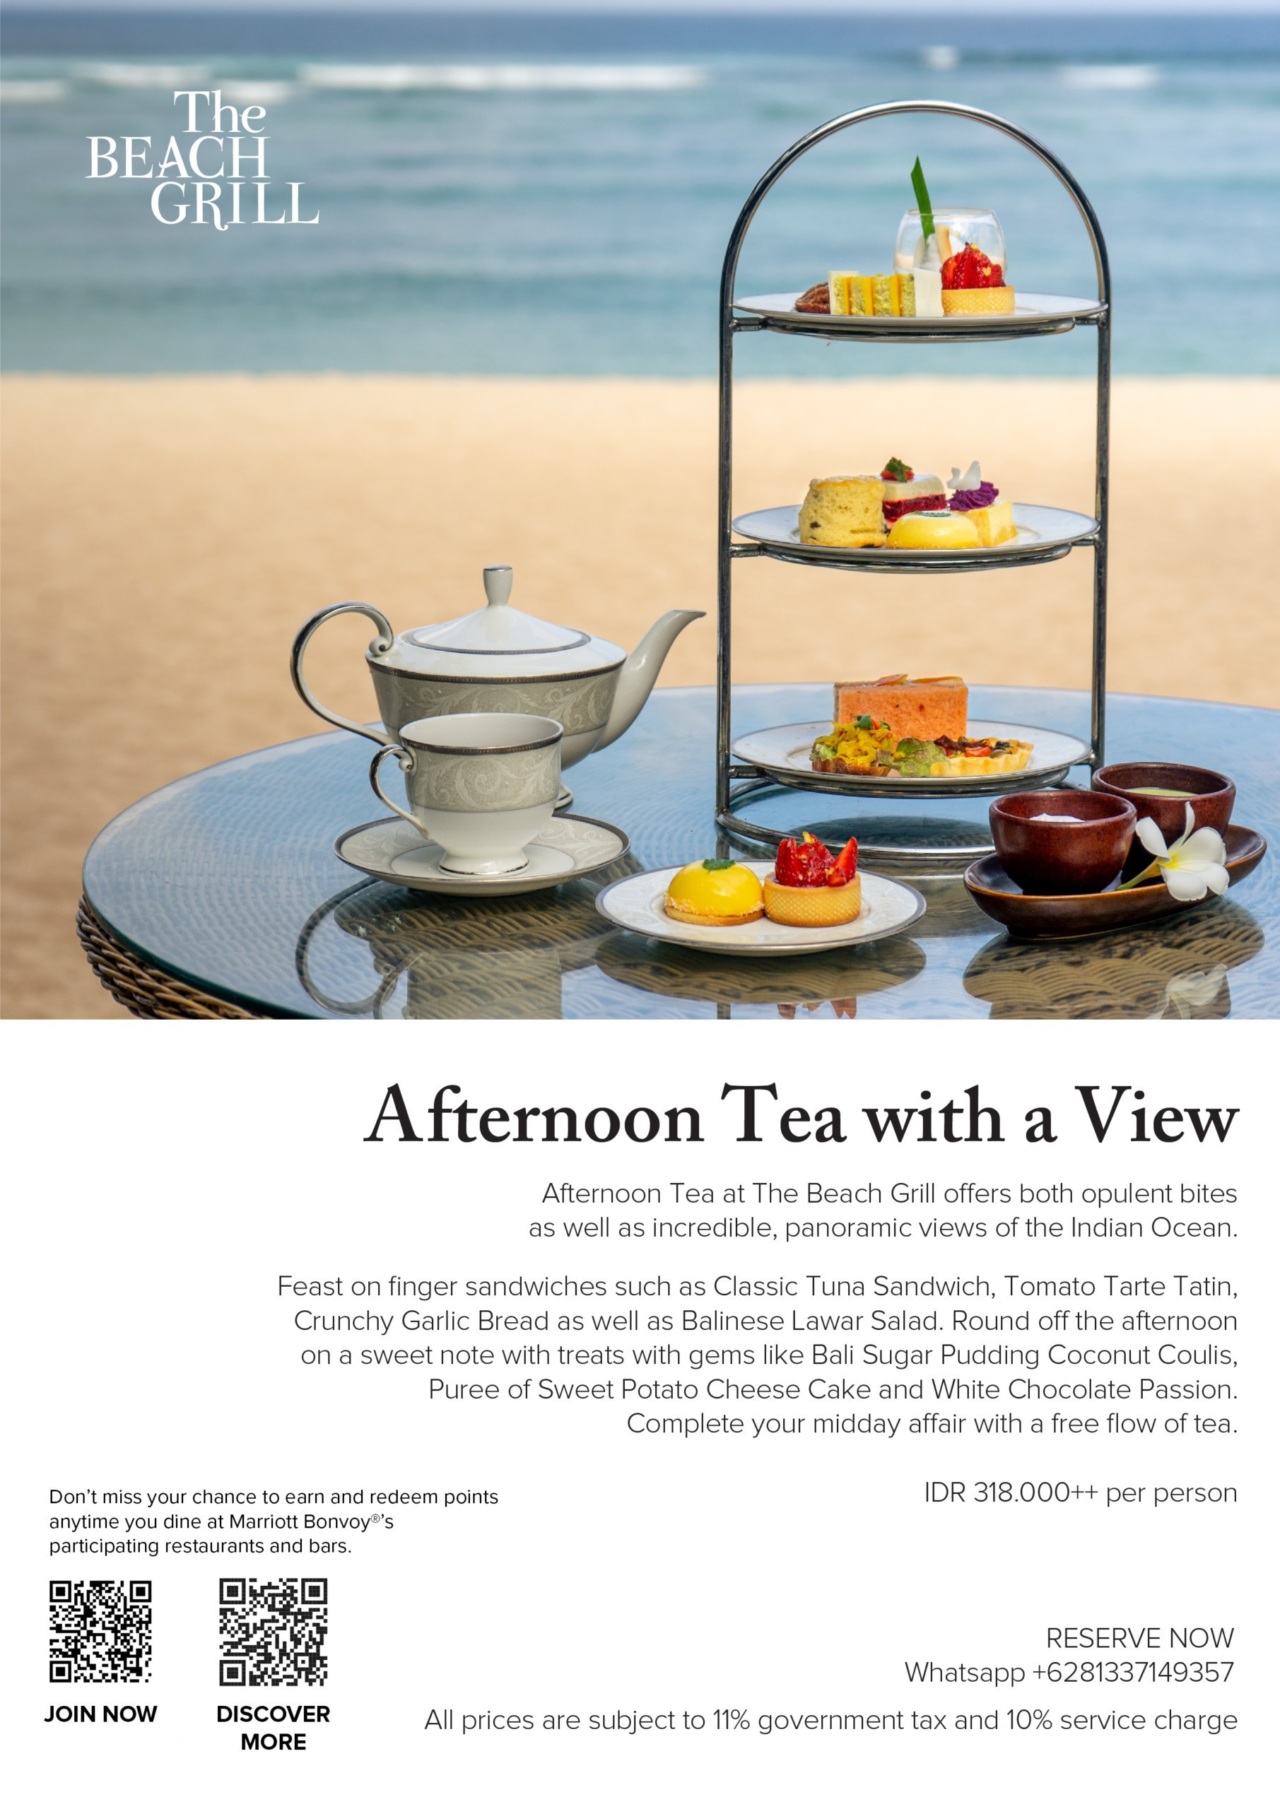 Afternoon-Tea-The-Beach-Grill-RB-scaled-1-1280x1809.jpg